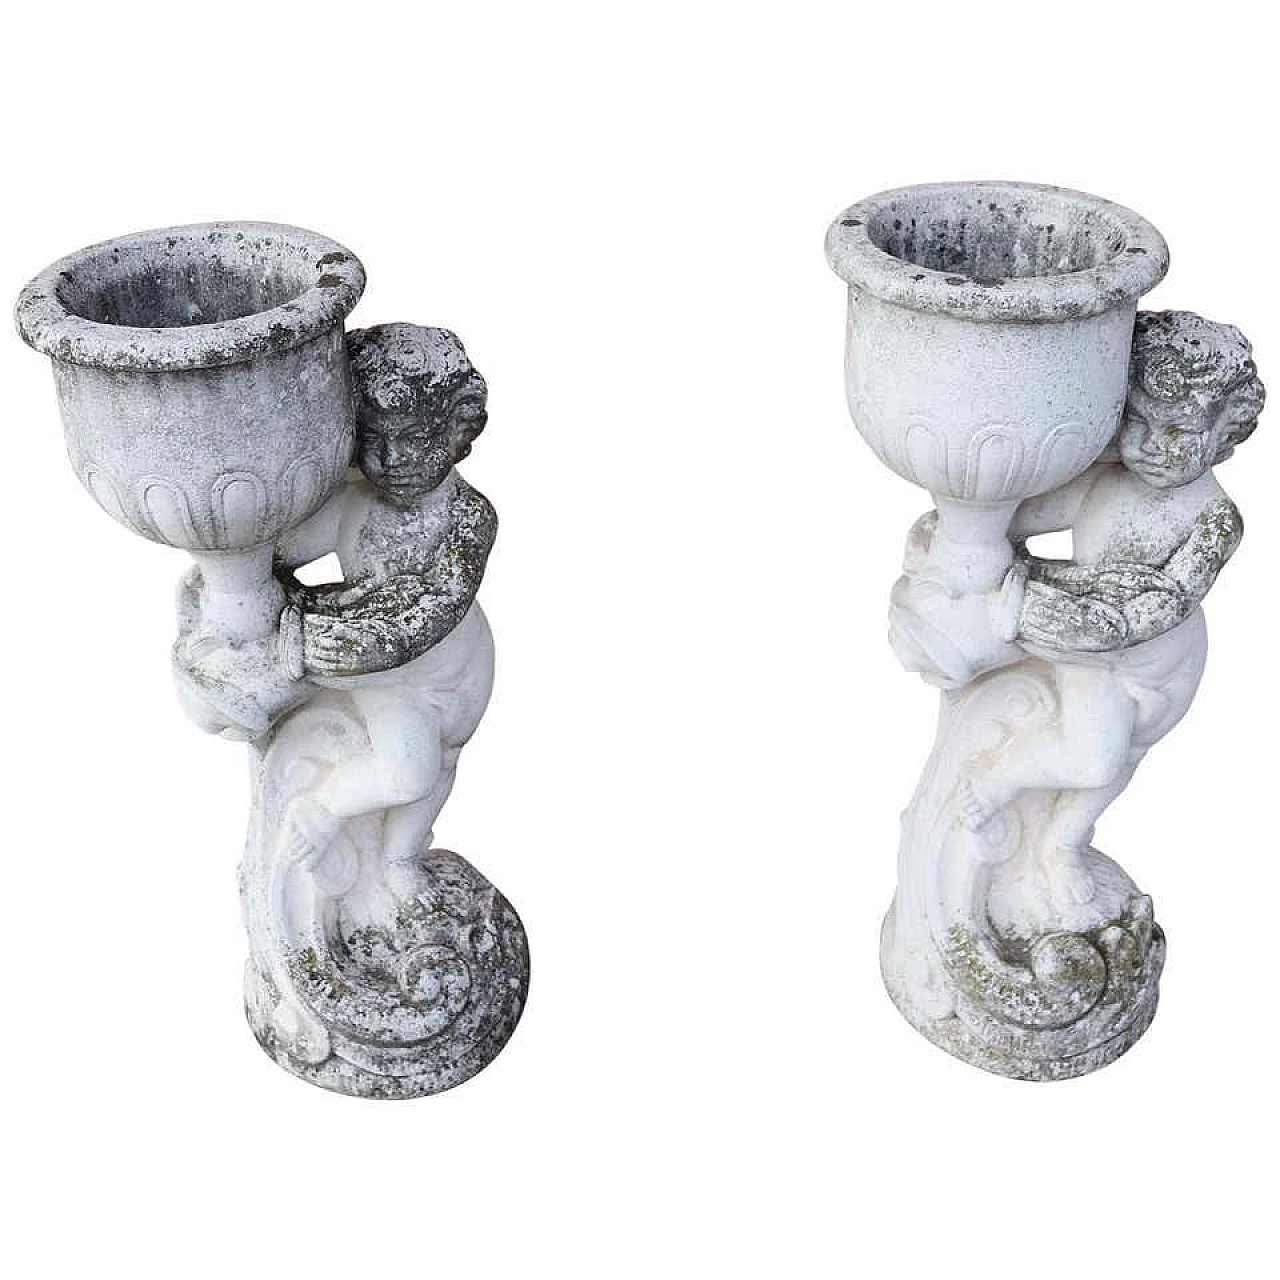 Pair of outdoor grit statues with vase holder, early 20th century 1277726